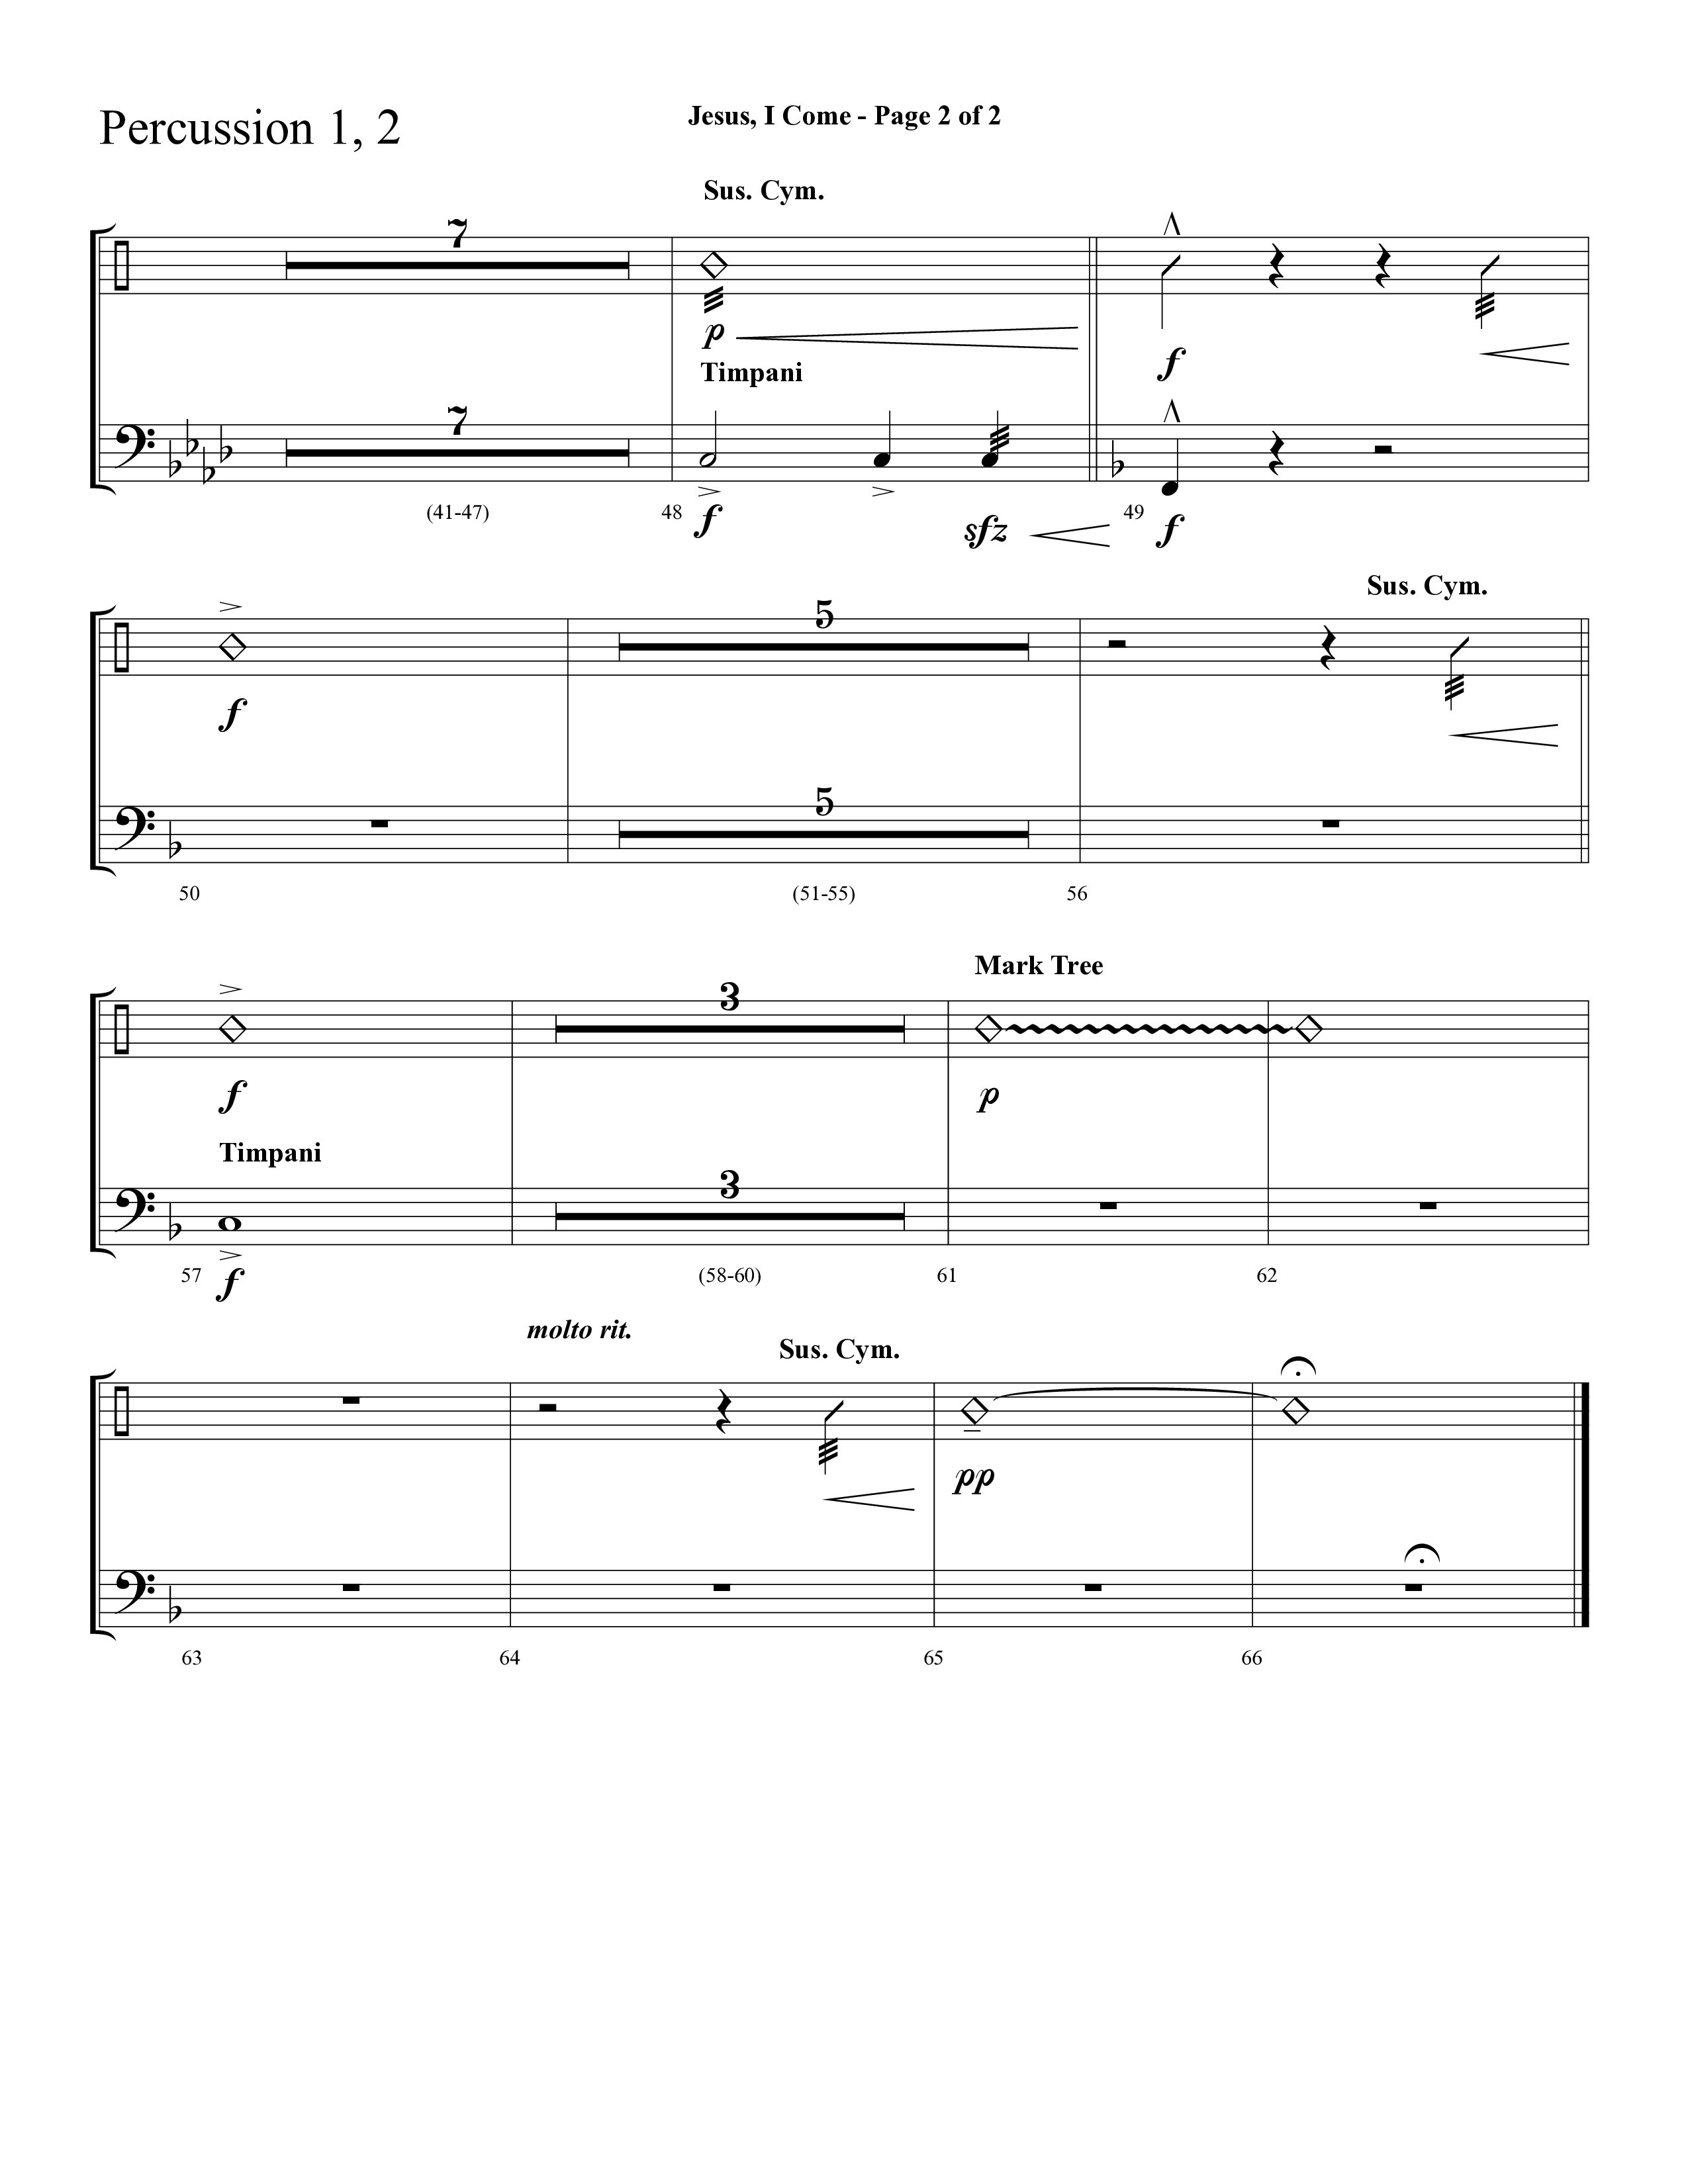 Jesus I Come (with Pass Me Not) (Choral Anthem SATB) Percussion 1/2 (Lifeway Choral / Arr. Cliff Duren)